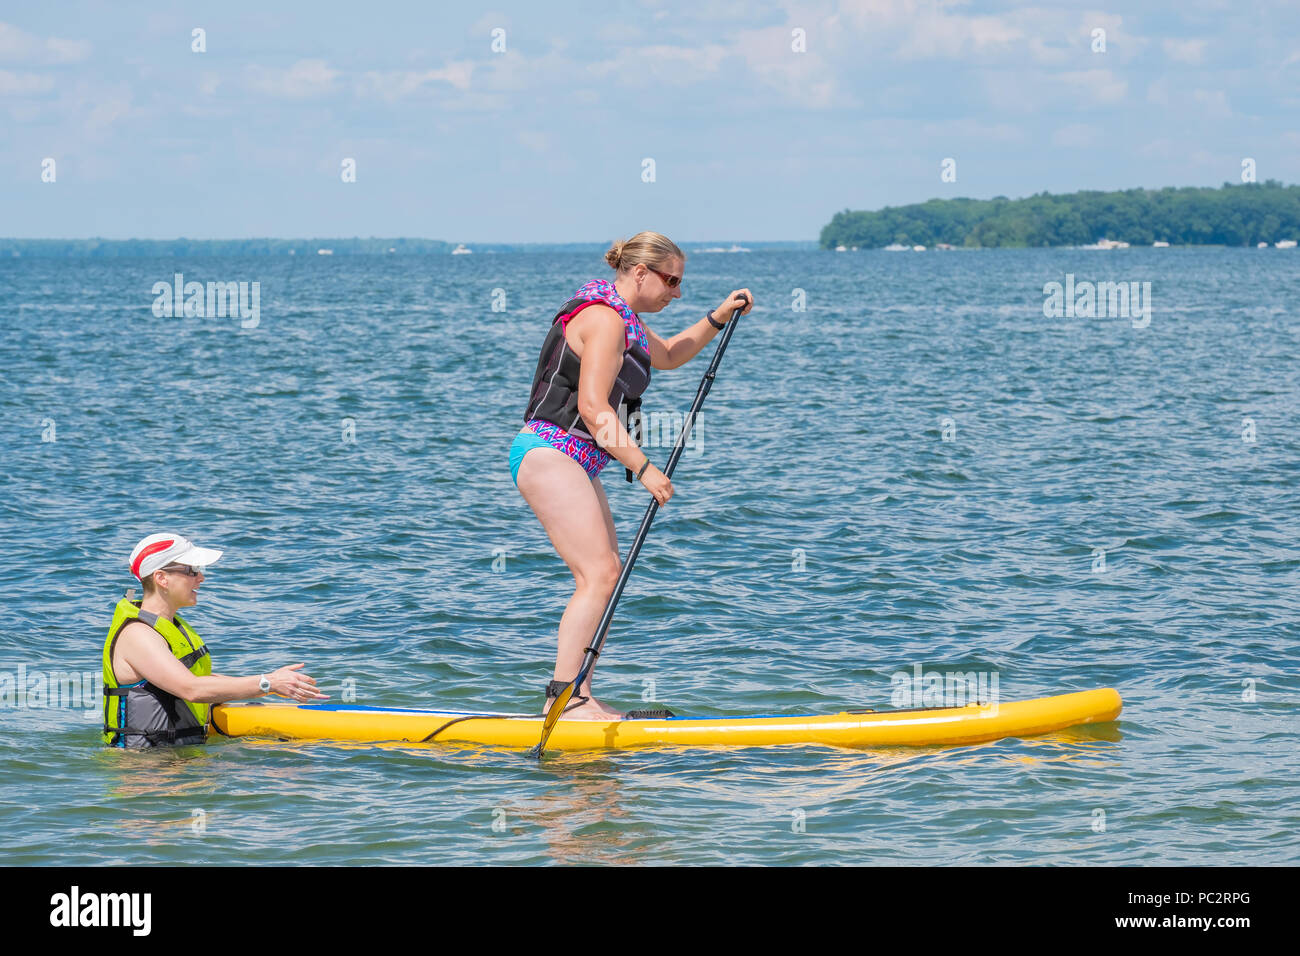 Woman learns the sport of paddleboarding on Lake Couchiching near Orillia Ontario Canada. Stock Photo